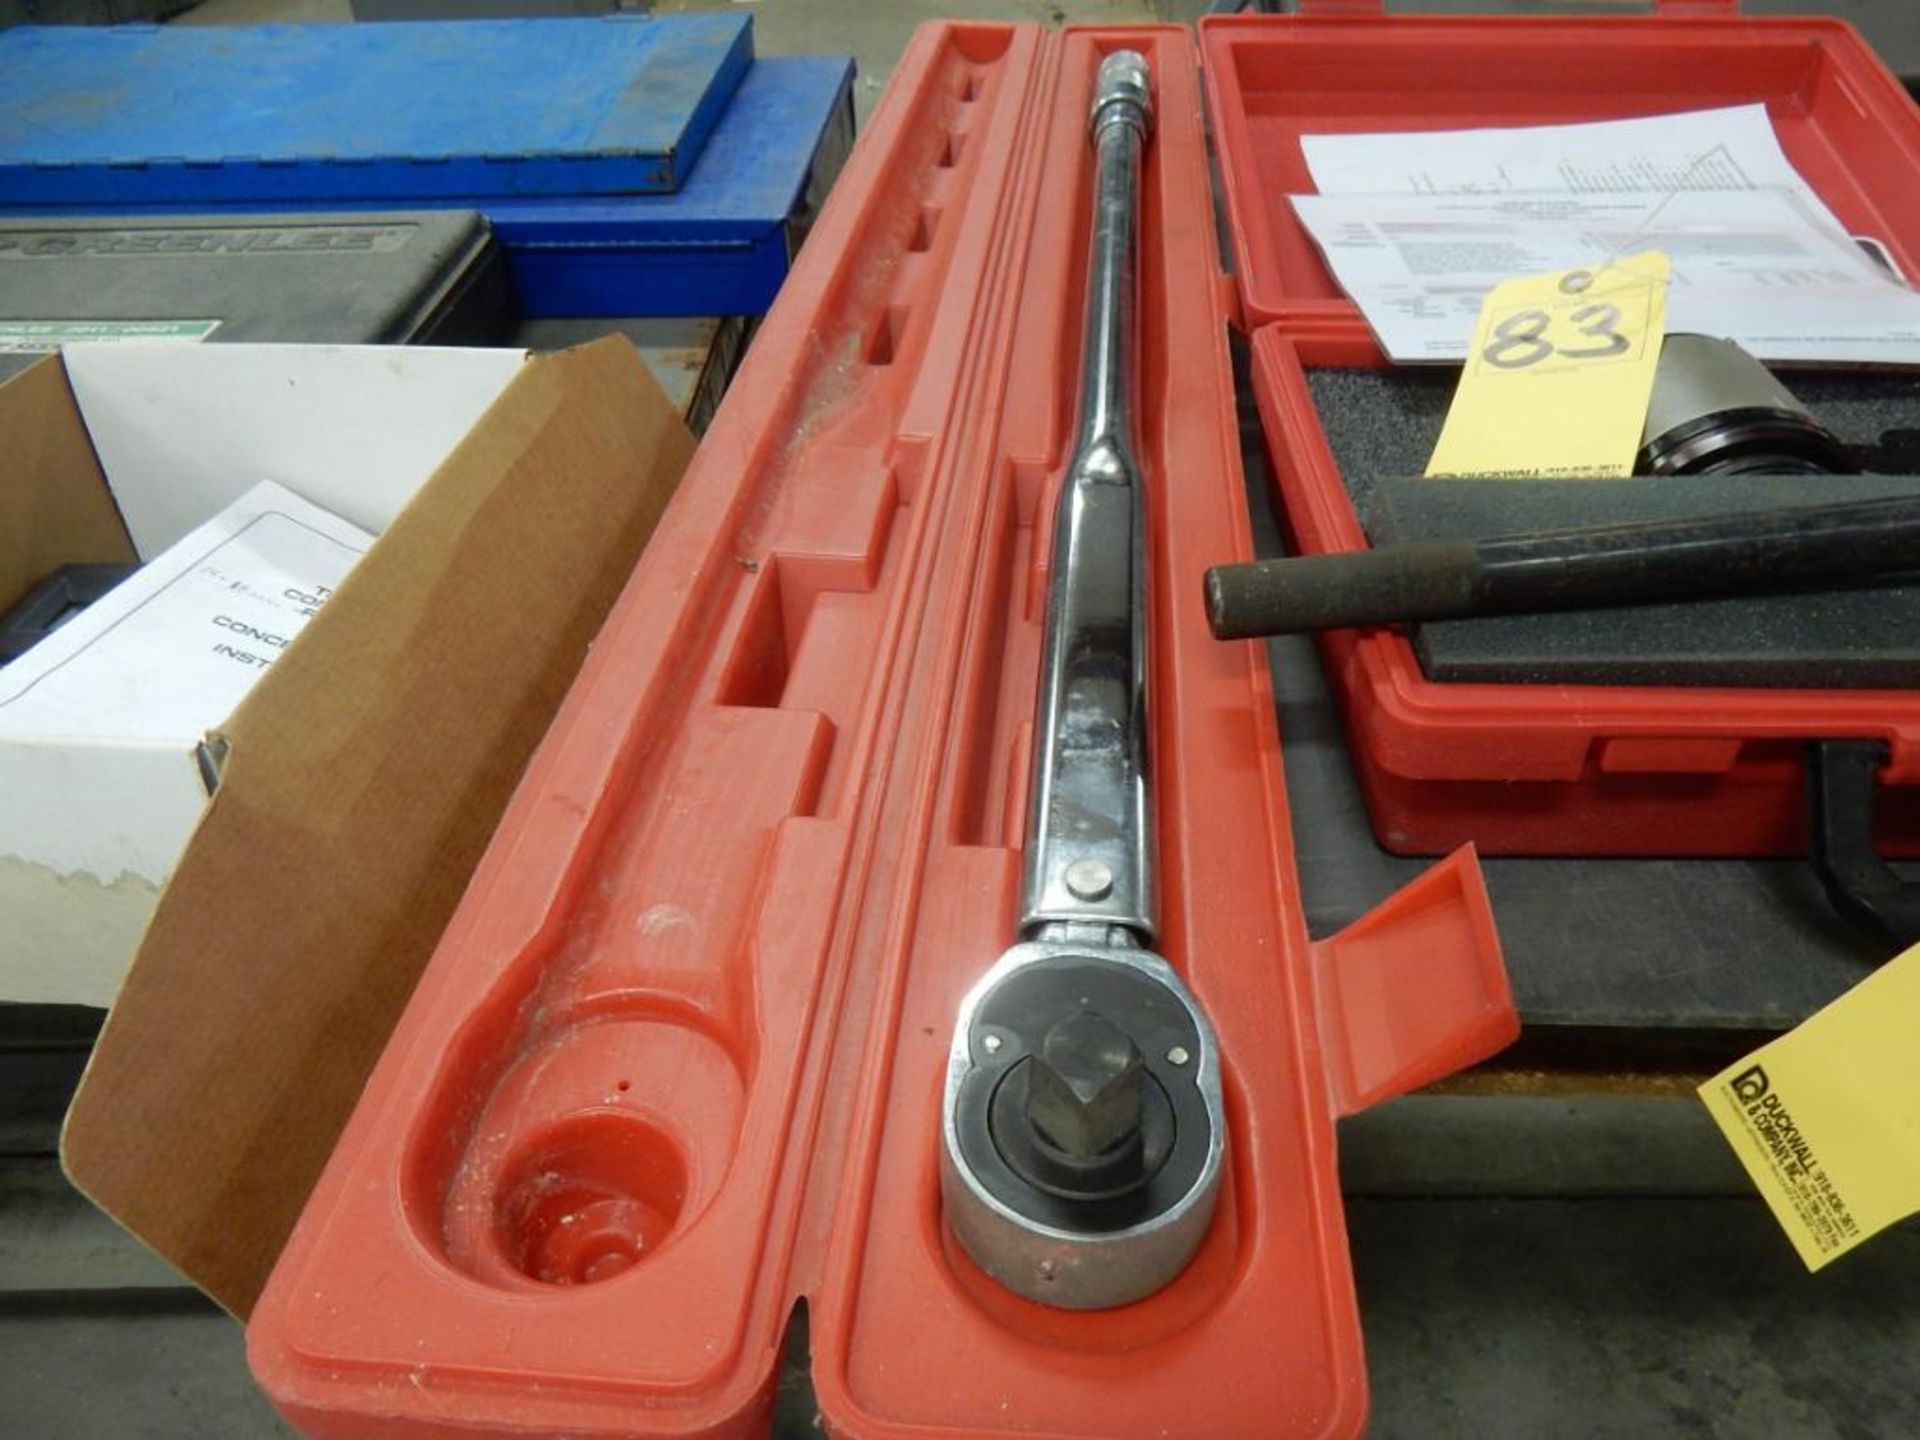 PROTO 6020AB 3/4" 600 FT. LB. TORQUE WRENCH - Image 2 of 2